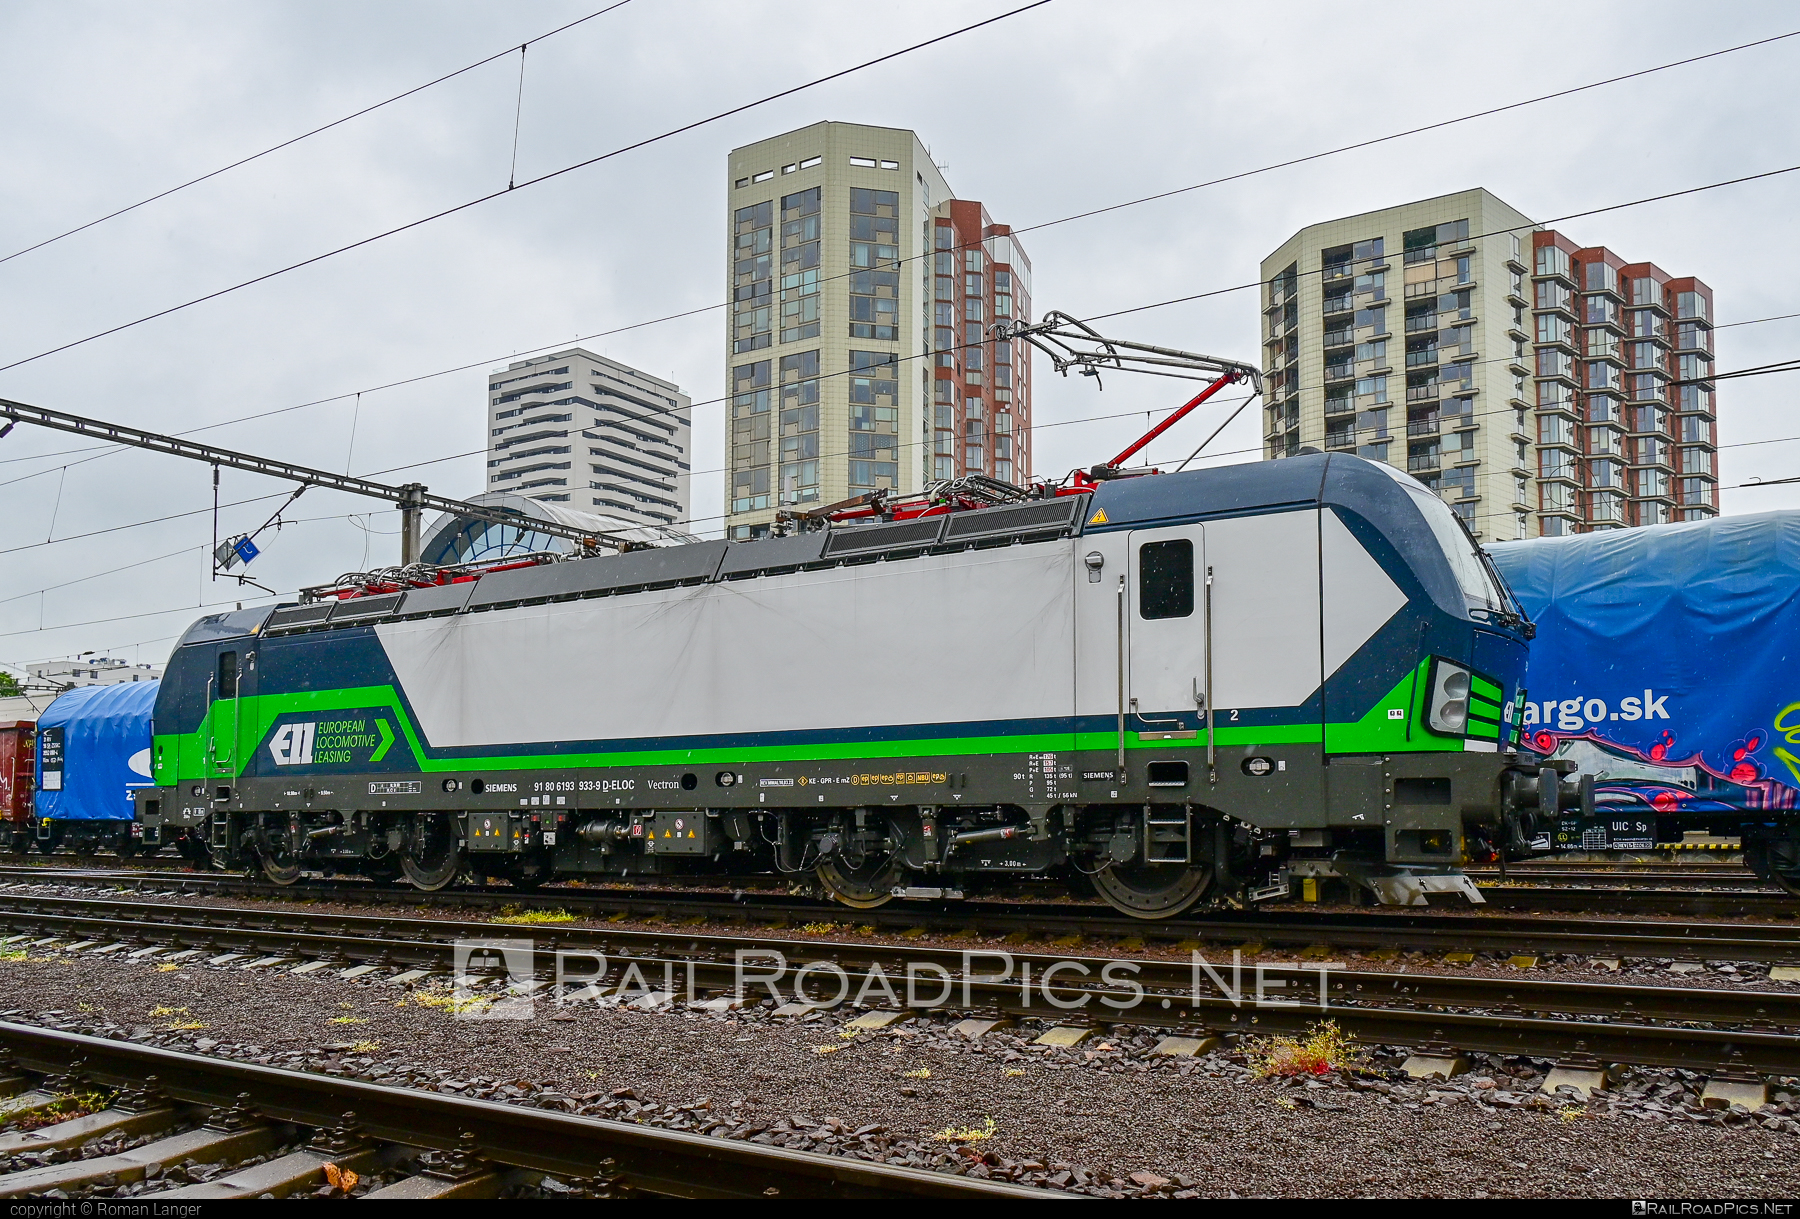 Siemens Vectron MS - 193 933 operated by LTE Logistik und Transport GmbH #ell #ellgermany #eloc #europeanlocomotiveleasing #lte #ltelogistikundtransport #ltelogistikundtransportgmbh #siemens #siemensVectron #siemensVectronMS #vectron #vectronMS